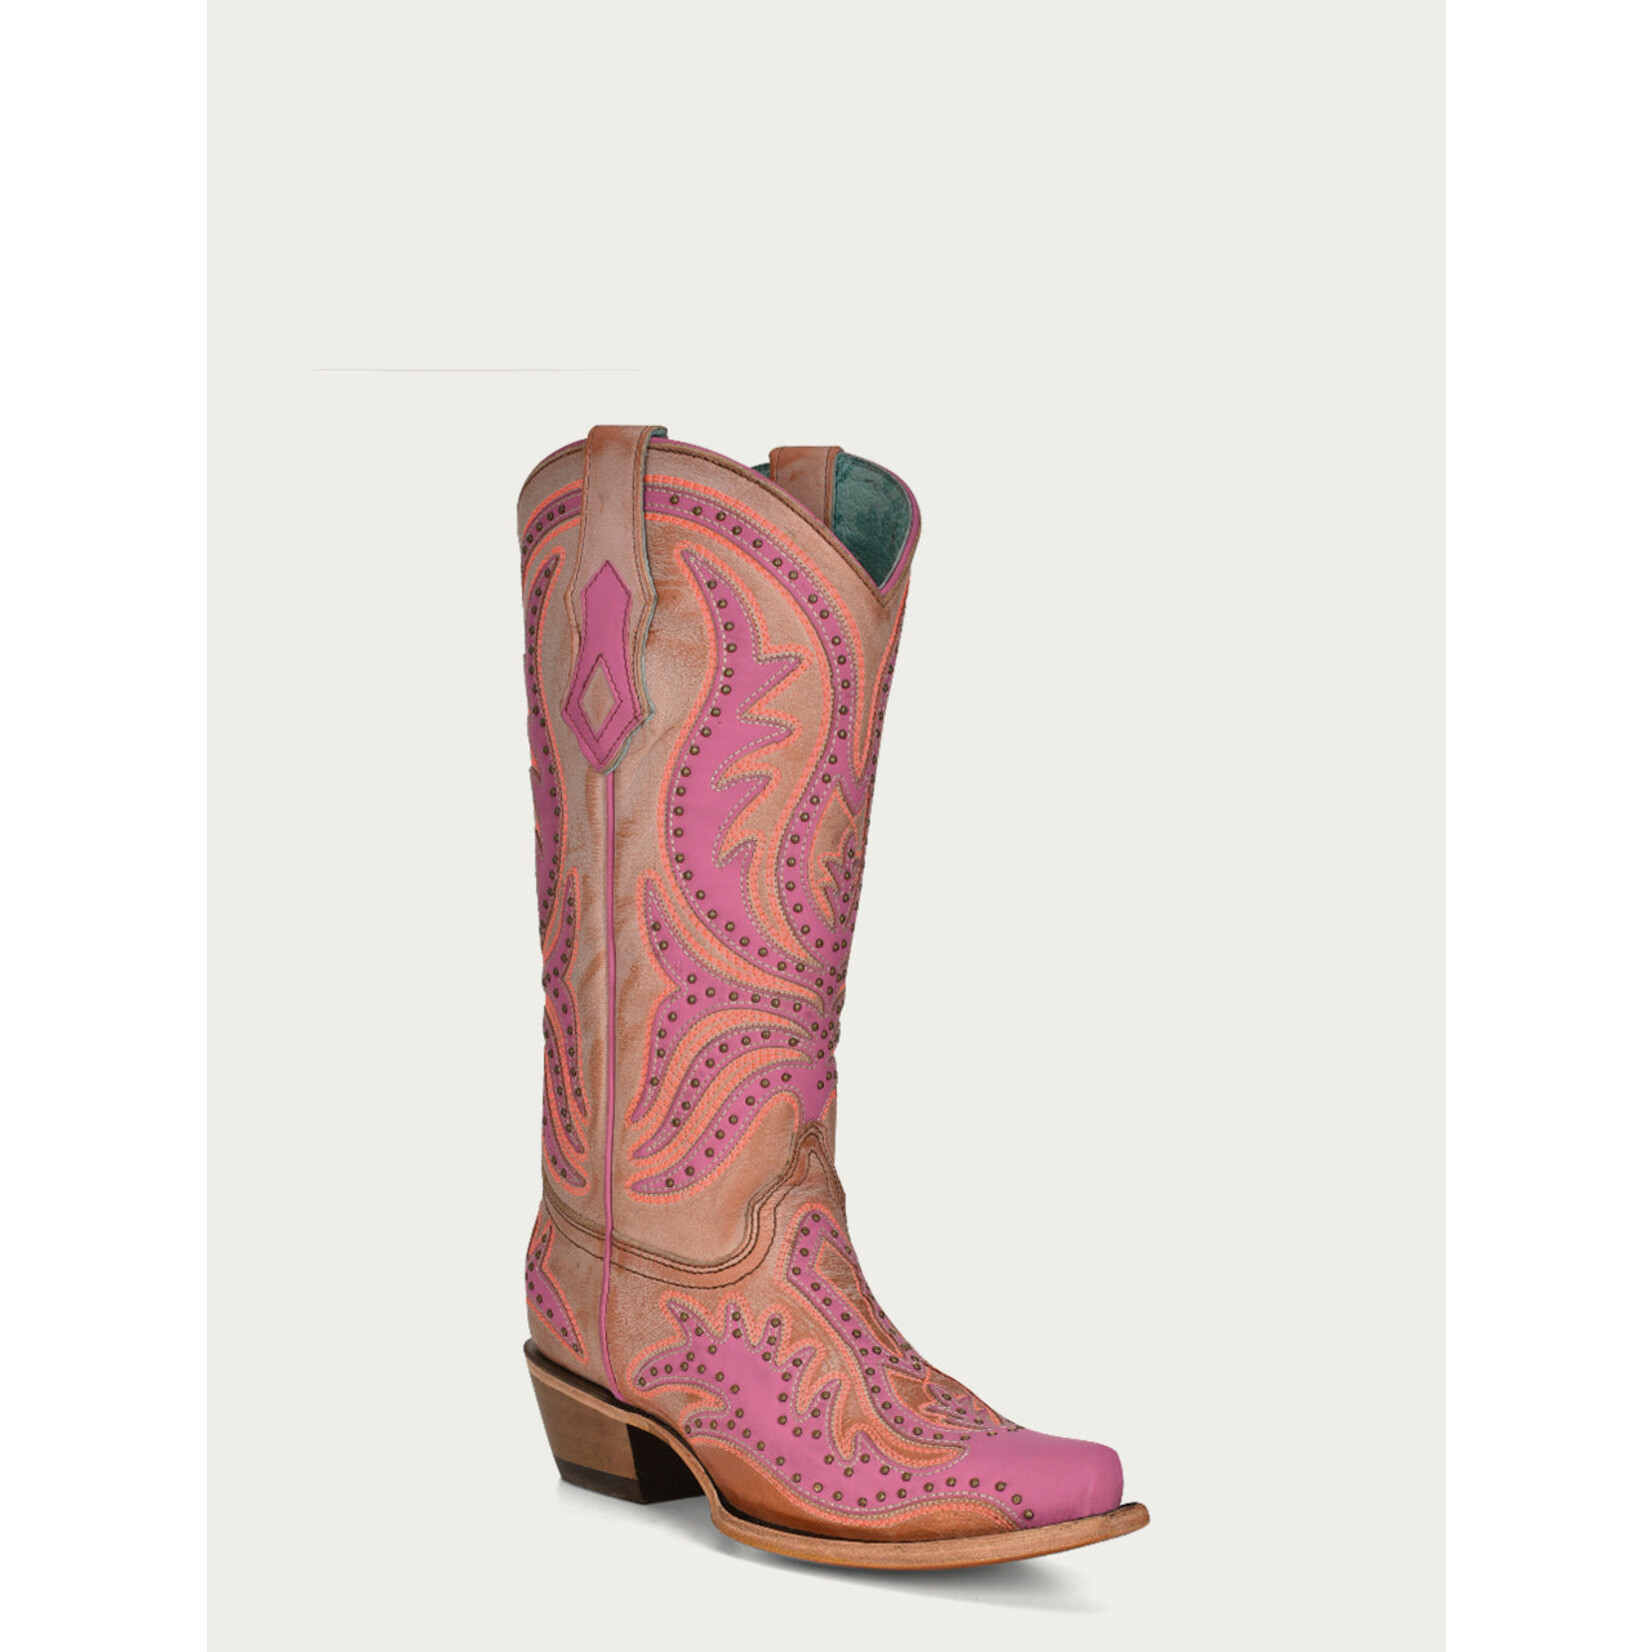 Corral Boots Corral Ladies Pink Fluorescent Embroidery & Studs Boot